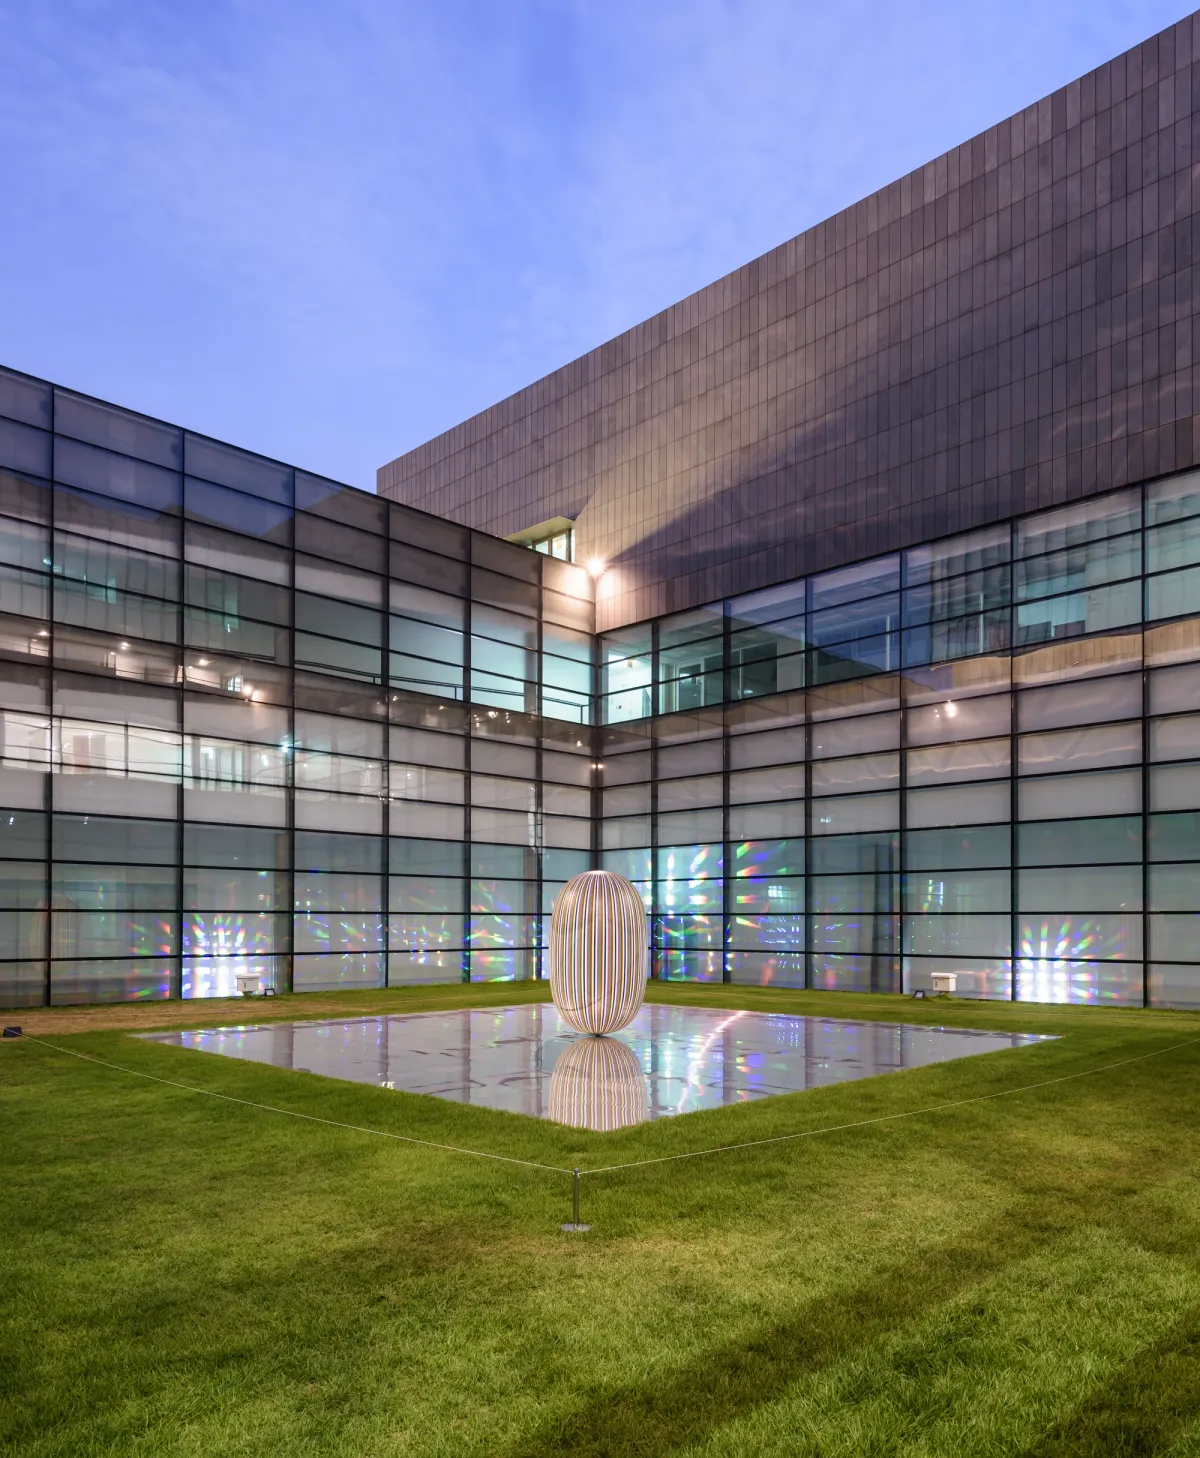 An elliptic sculpture situated on a mirrored rectangular surface in the backyard of a building with numerous windows. The sculpture's smooth, curved form contrasts with the building's angular architecture.